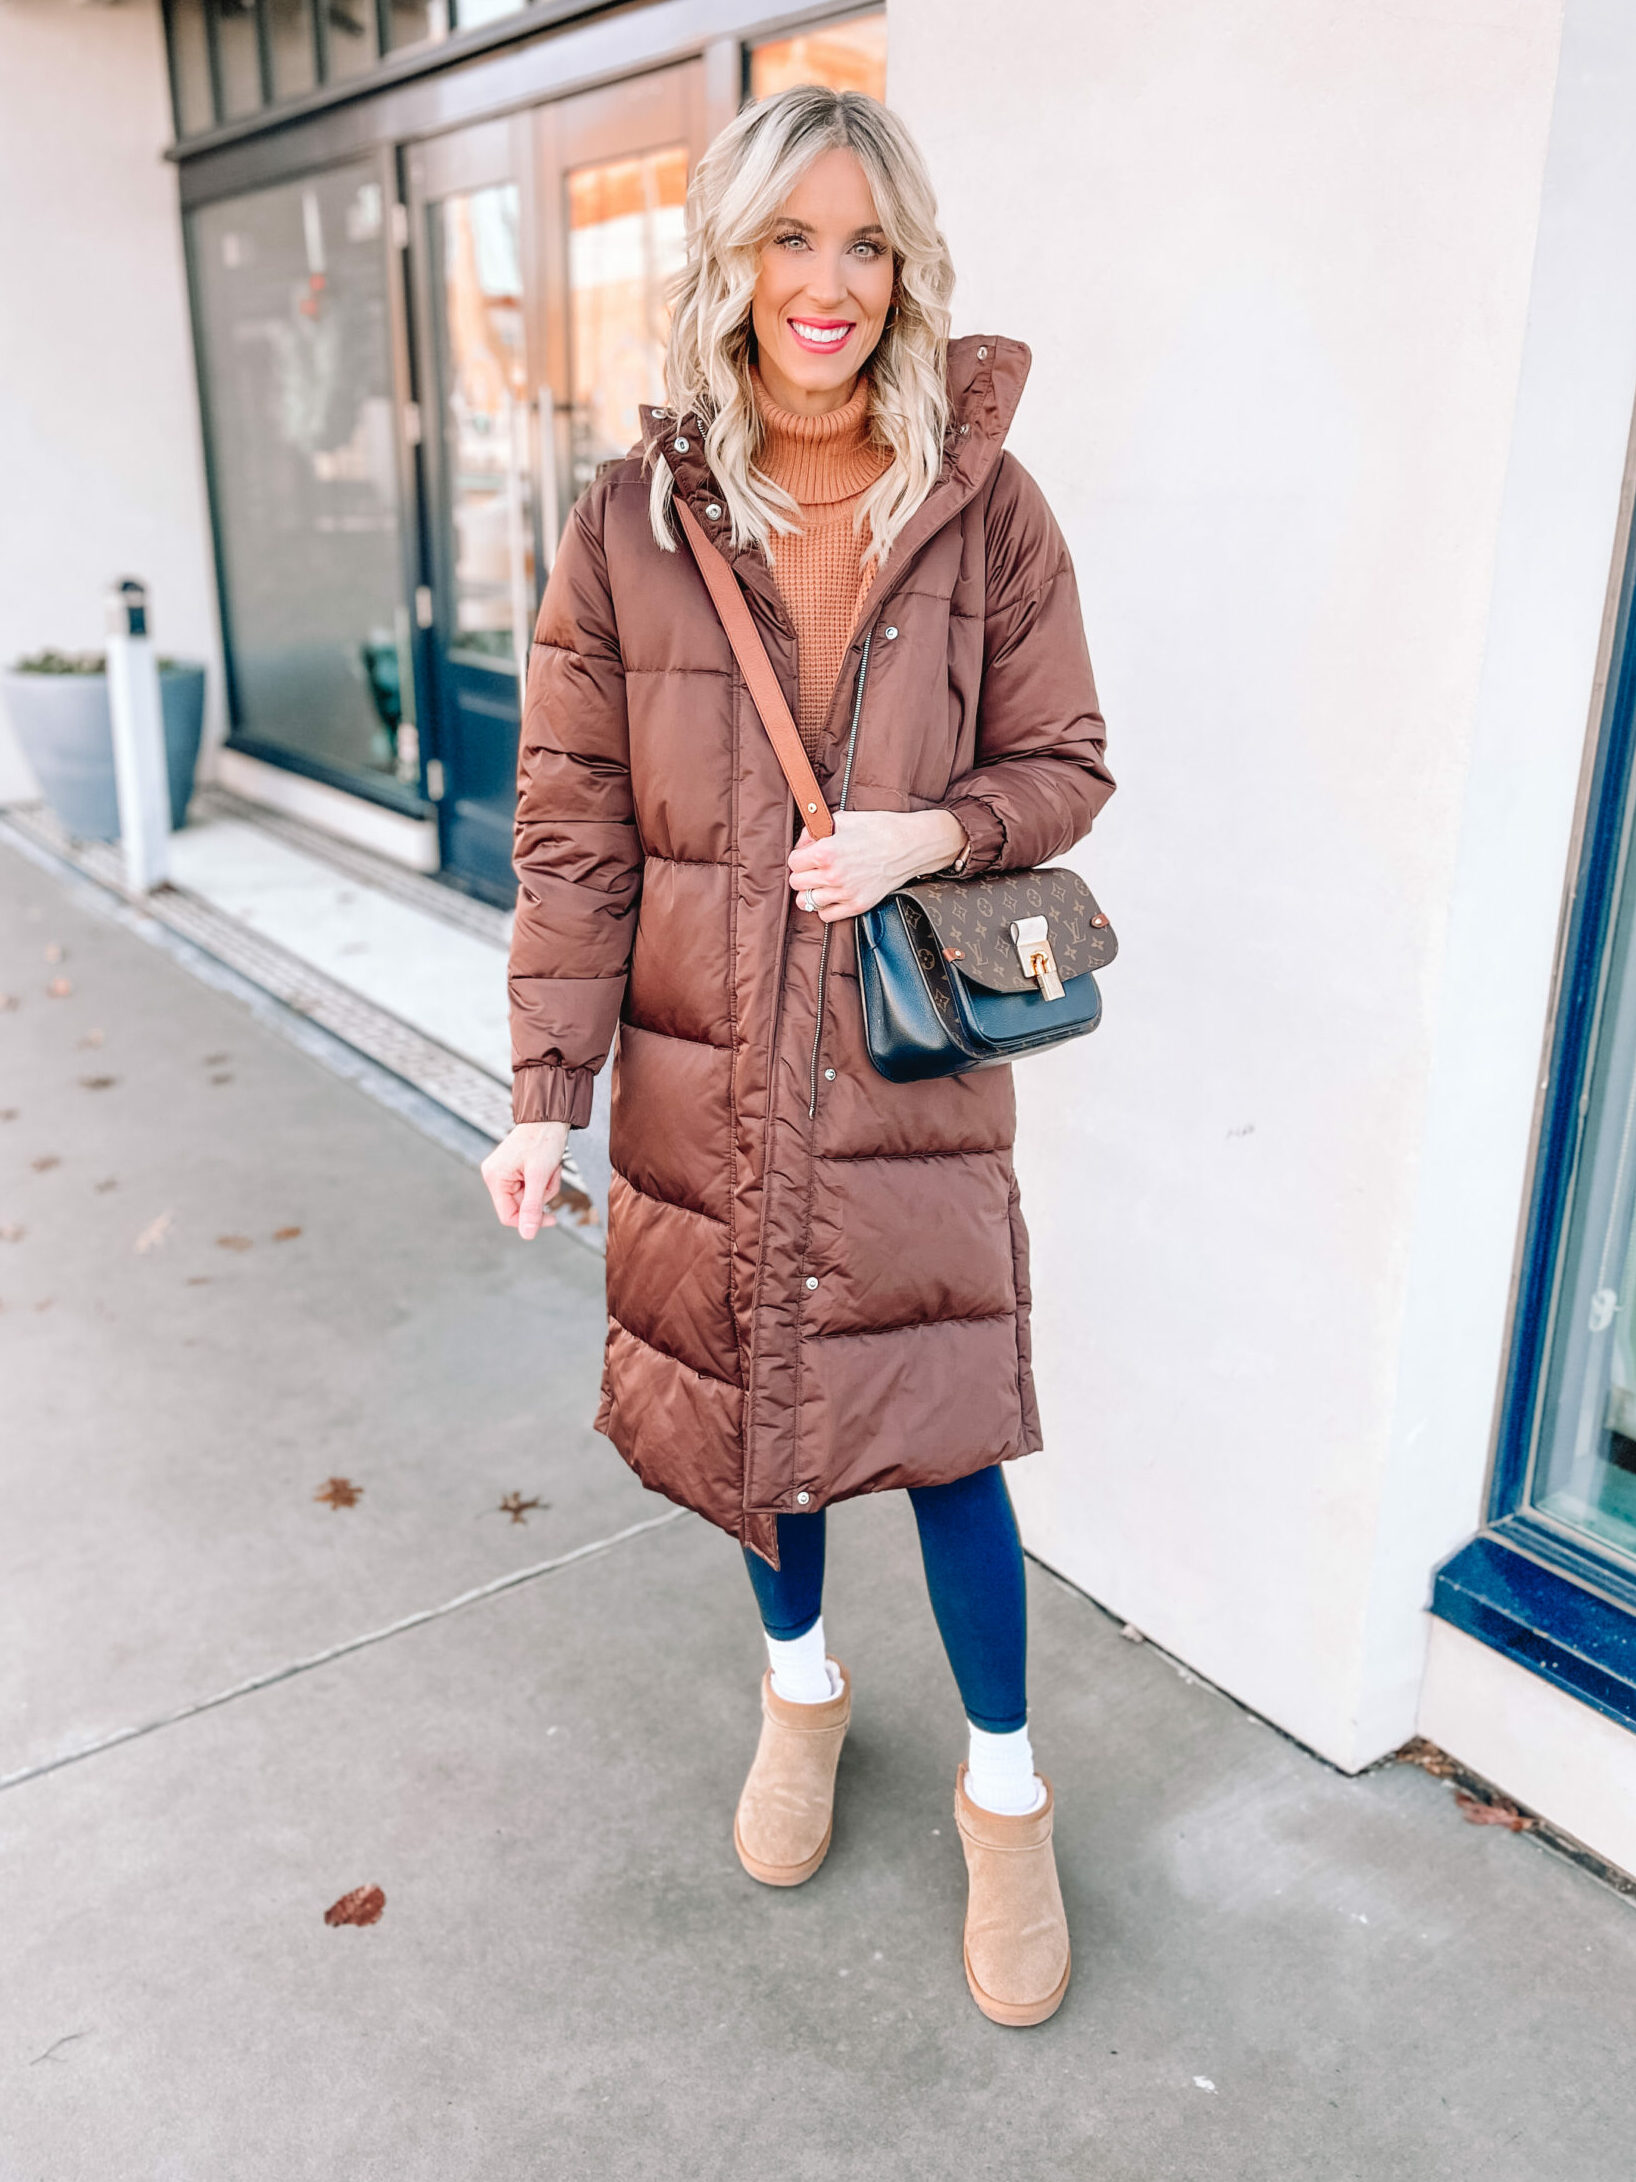 You'll love this Amazon casual outfit with the curved hem tunic sweater, lululemon lookalike leggings, and Ugg mini dupe boots. I added my brown puffer coat too!